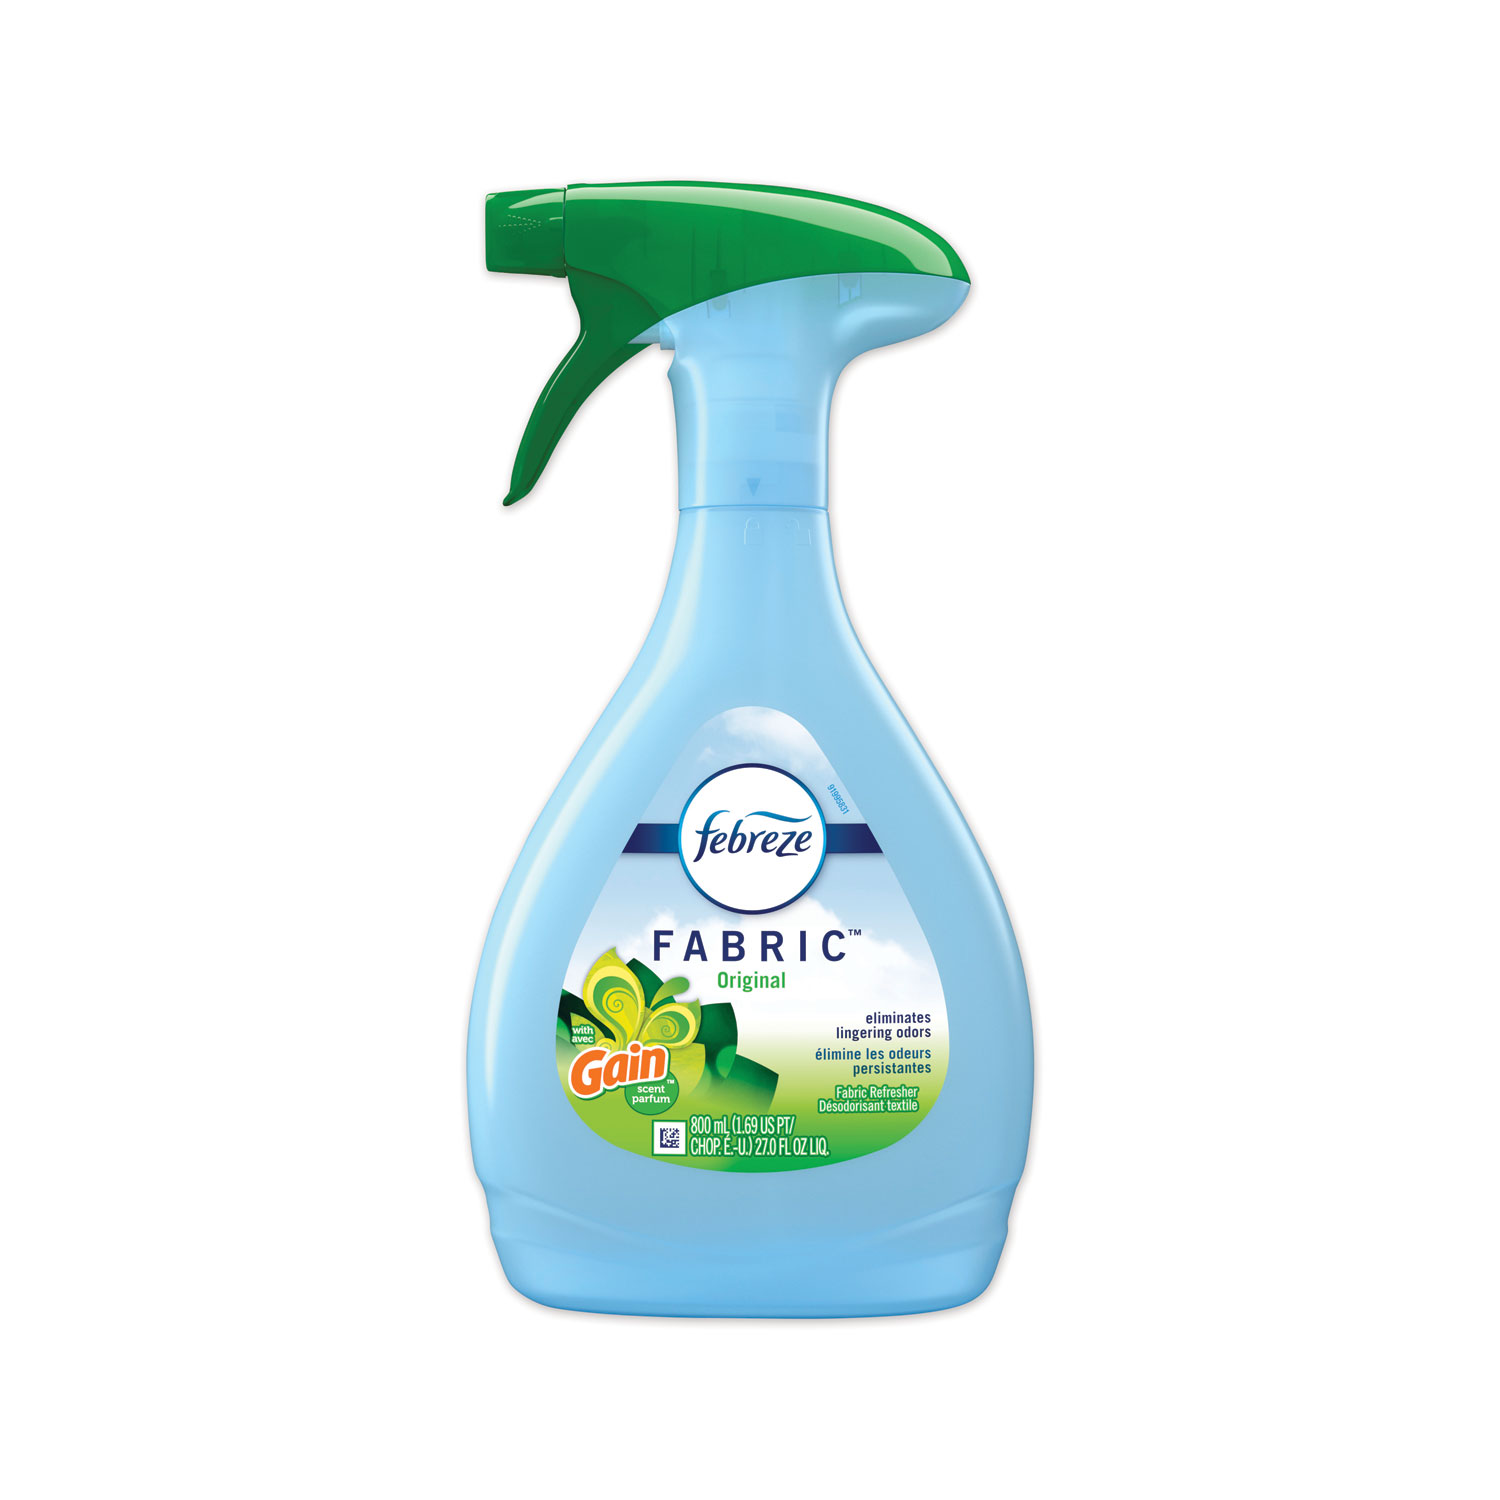 I Used Febreze's Fabric Antimicrobial Spray in My Home, and Here